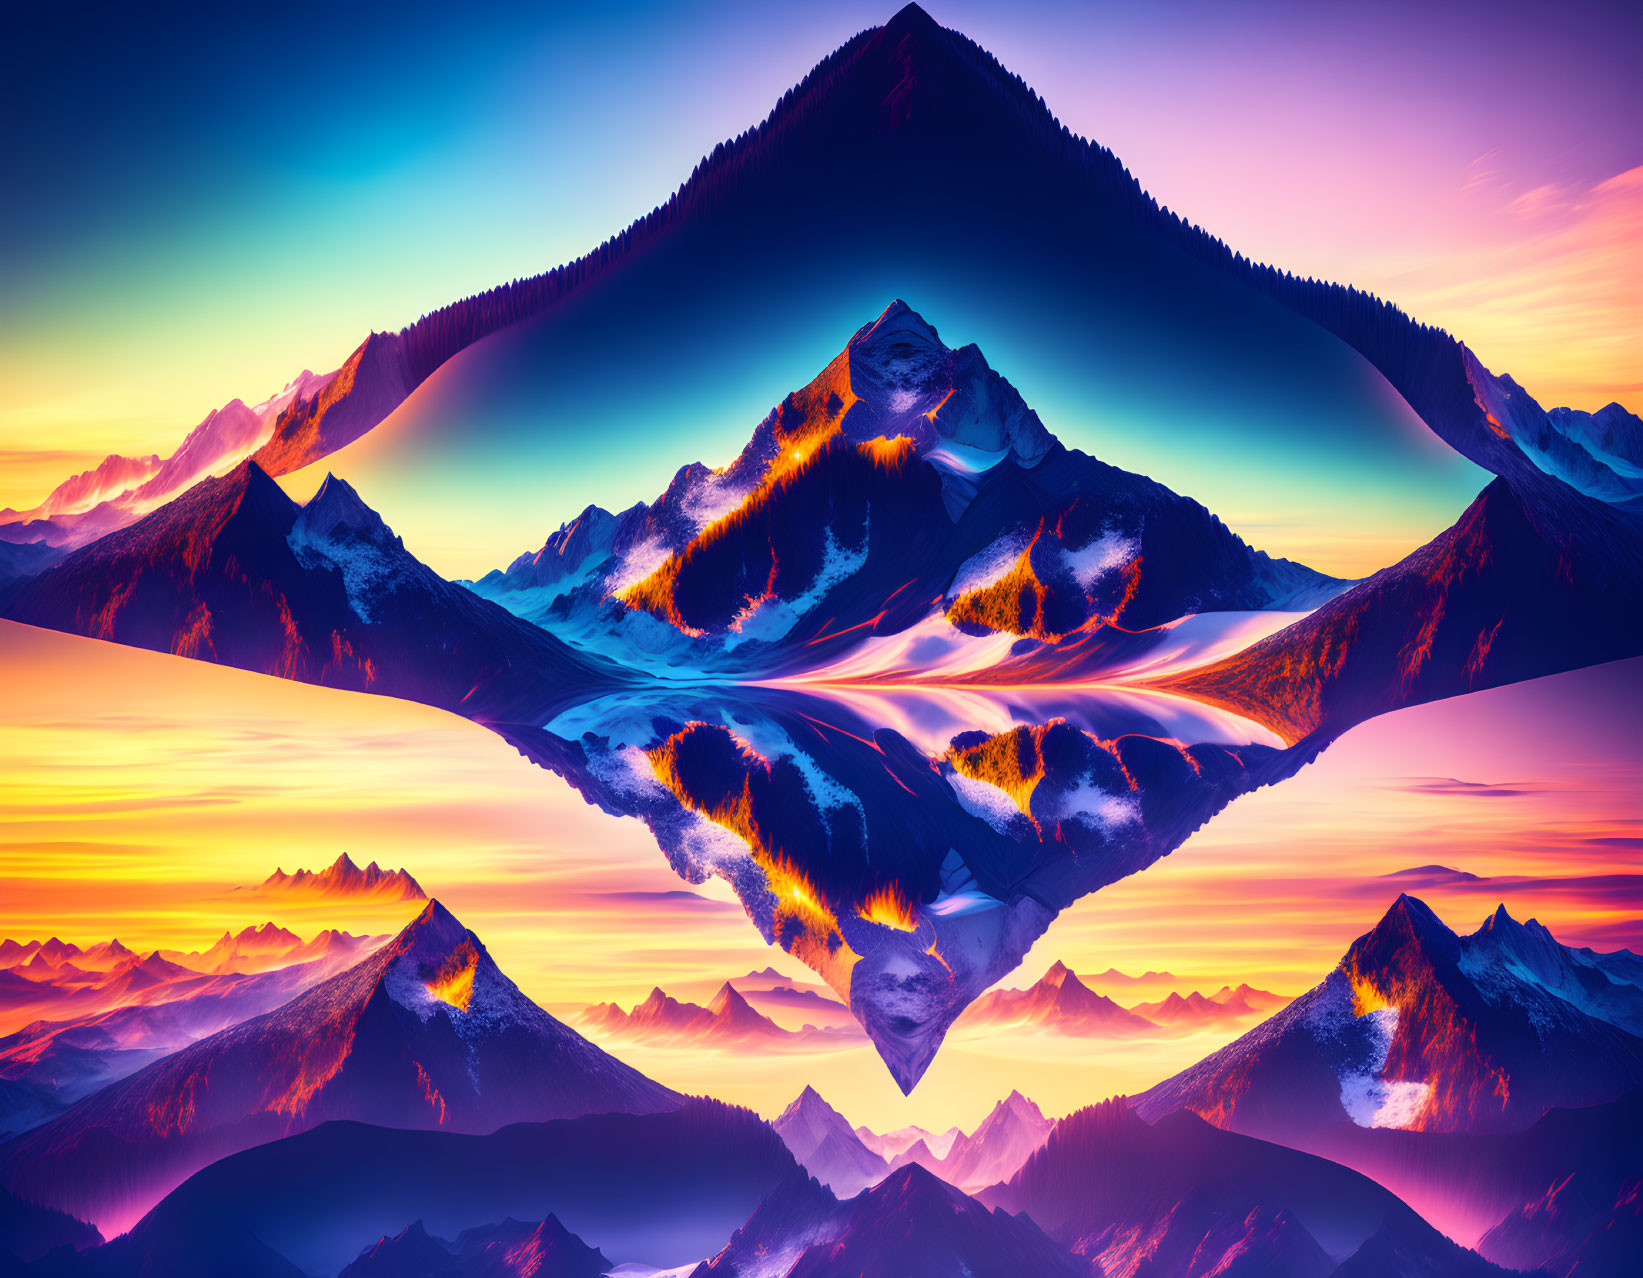 Surreal landscape with mirrored mountain ranges under gradient sky